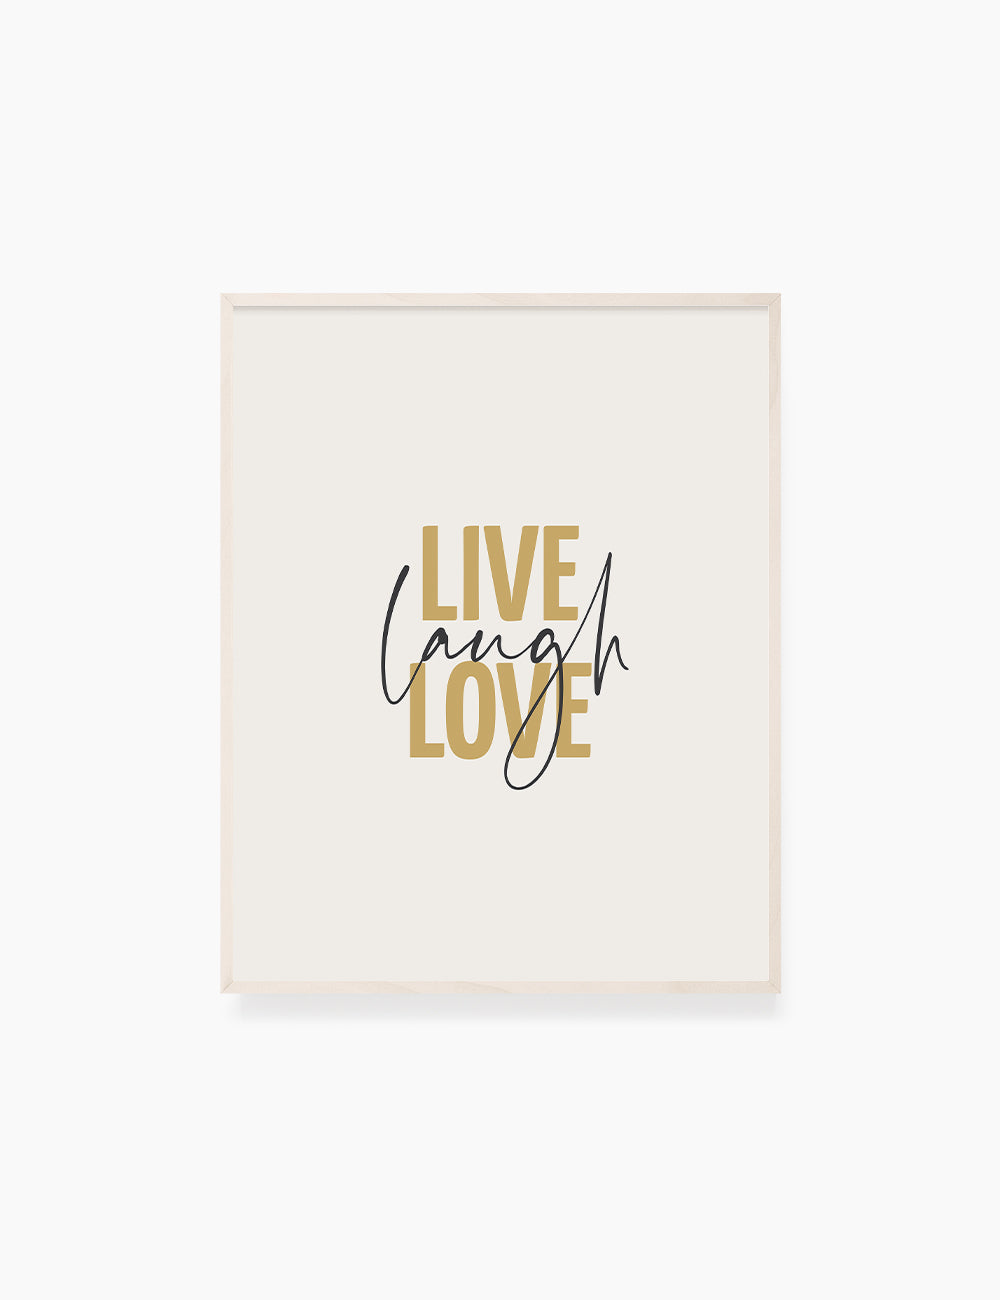 LIVE. LAUGH. LOVE. Yellow Gold. Beige. Inspirational quote. Printable Wall  Art Quote. – PAPER MOON Art & Design